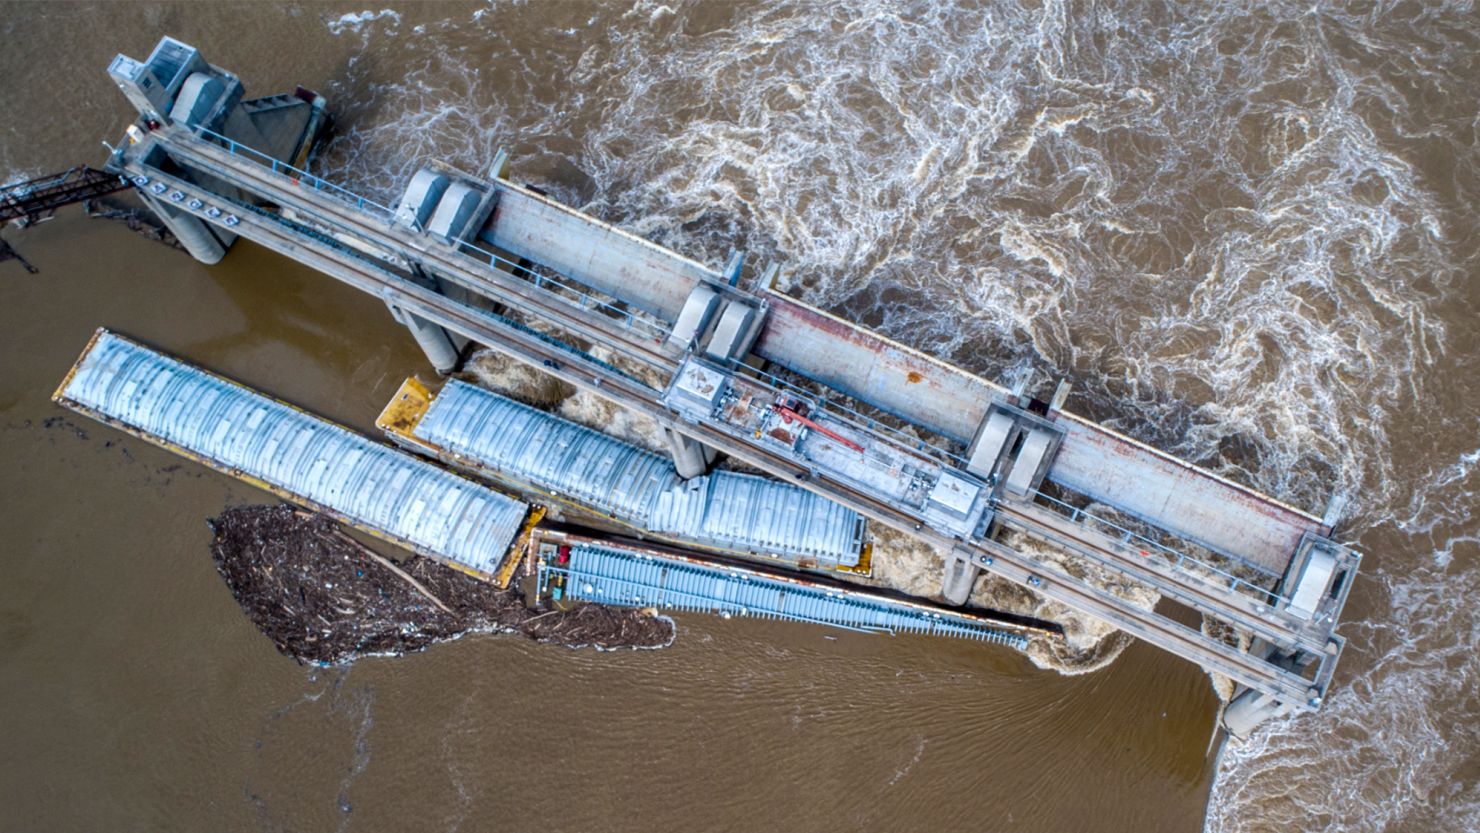 Two barges stuck in the Ohio River; one has been removed, while the other remains.